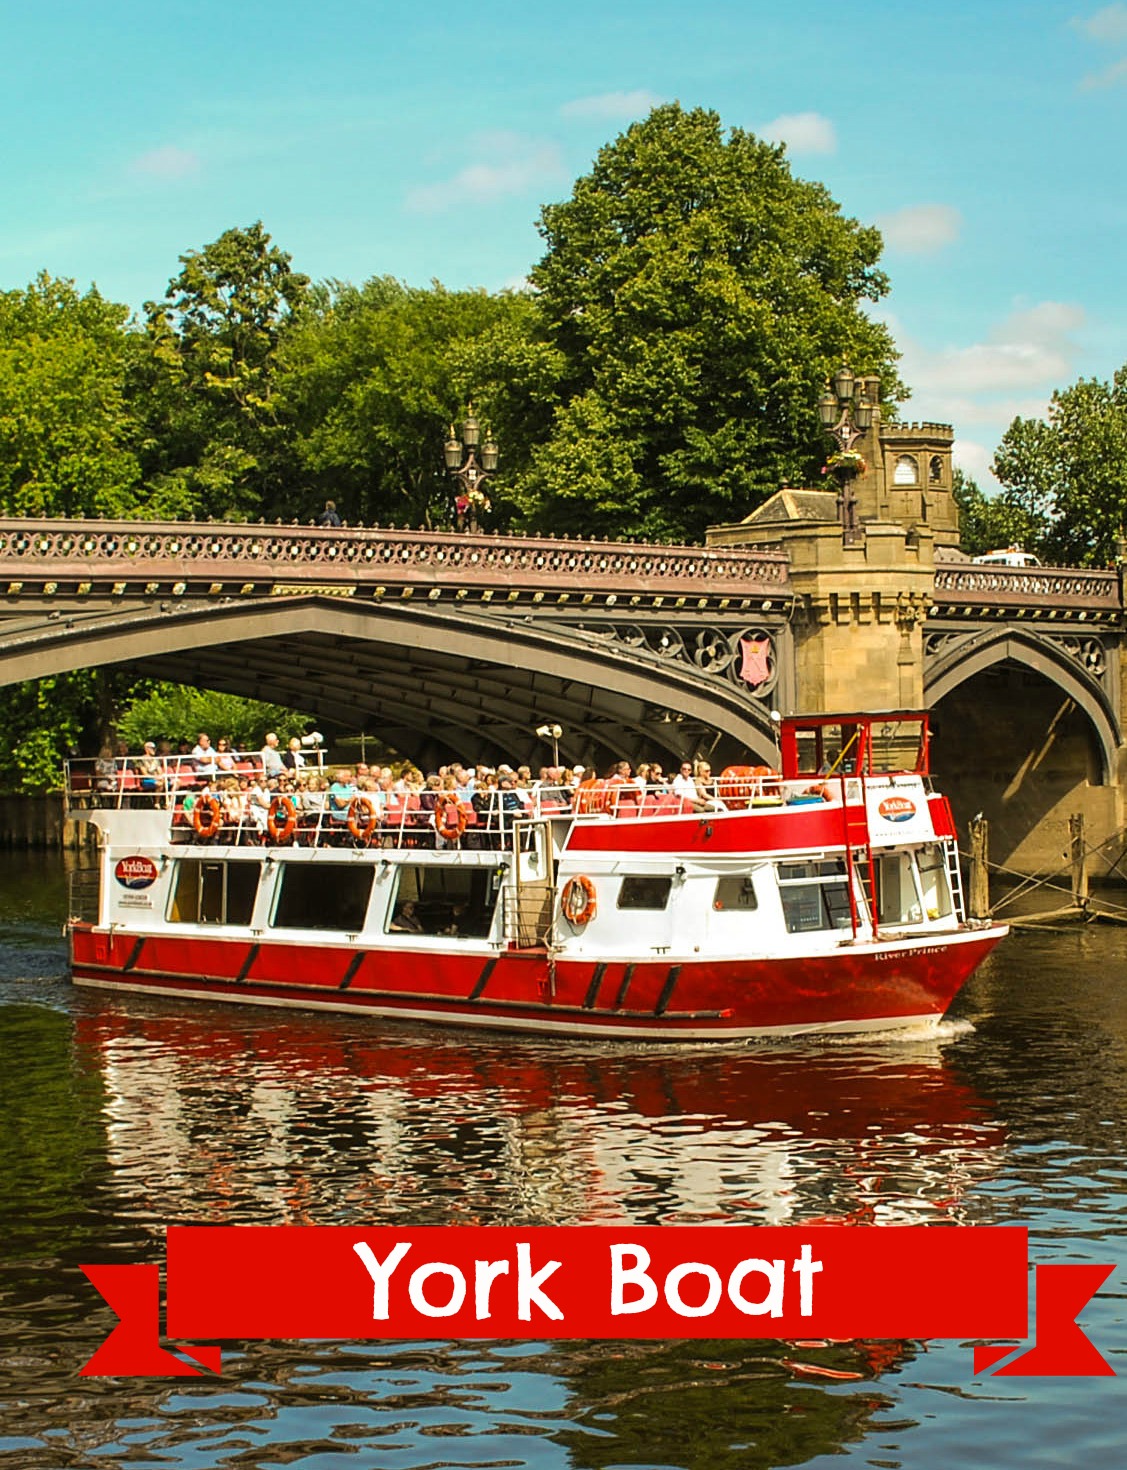 York Boat review